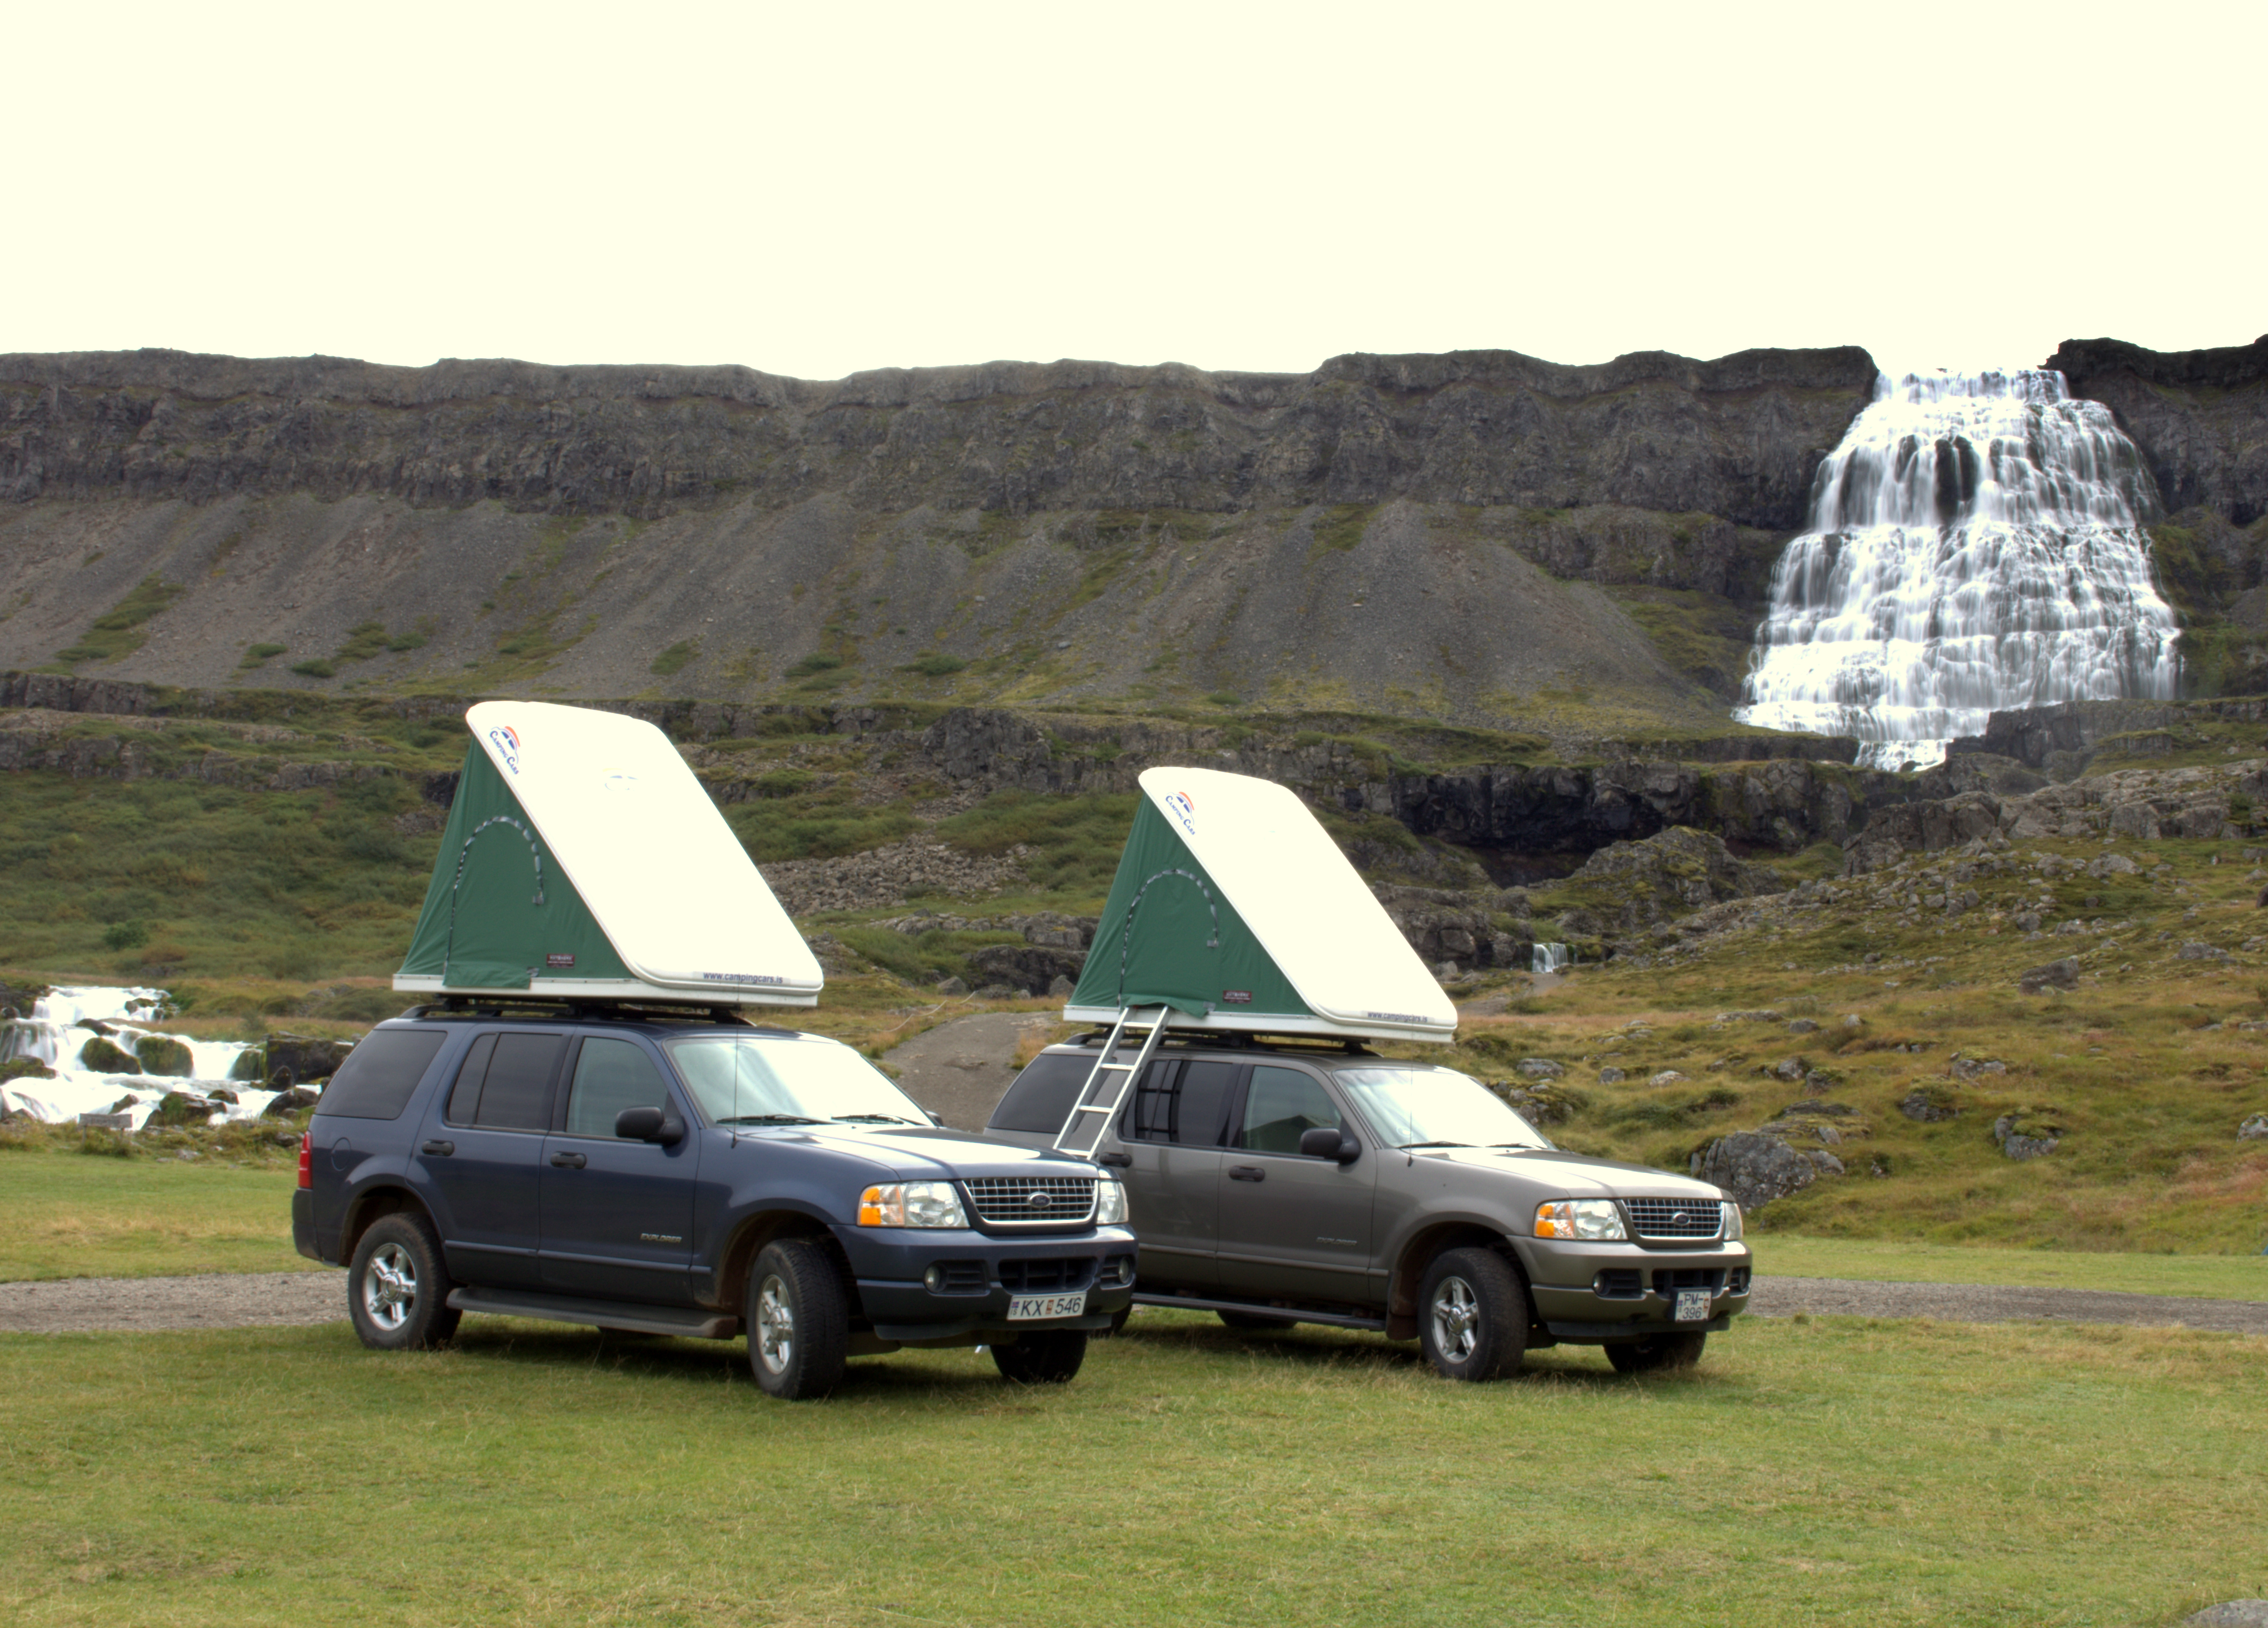 Ford explorer tent camping #8